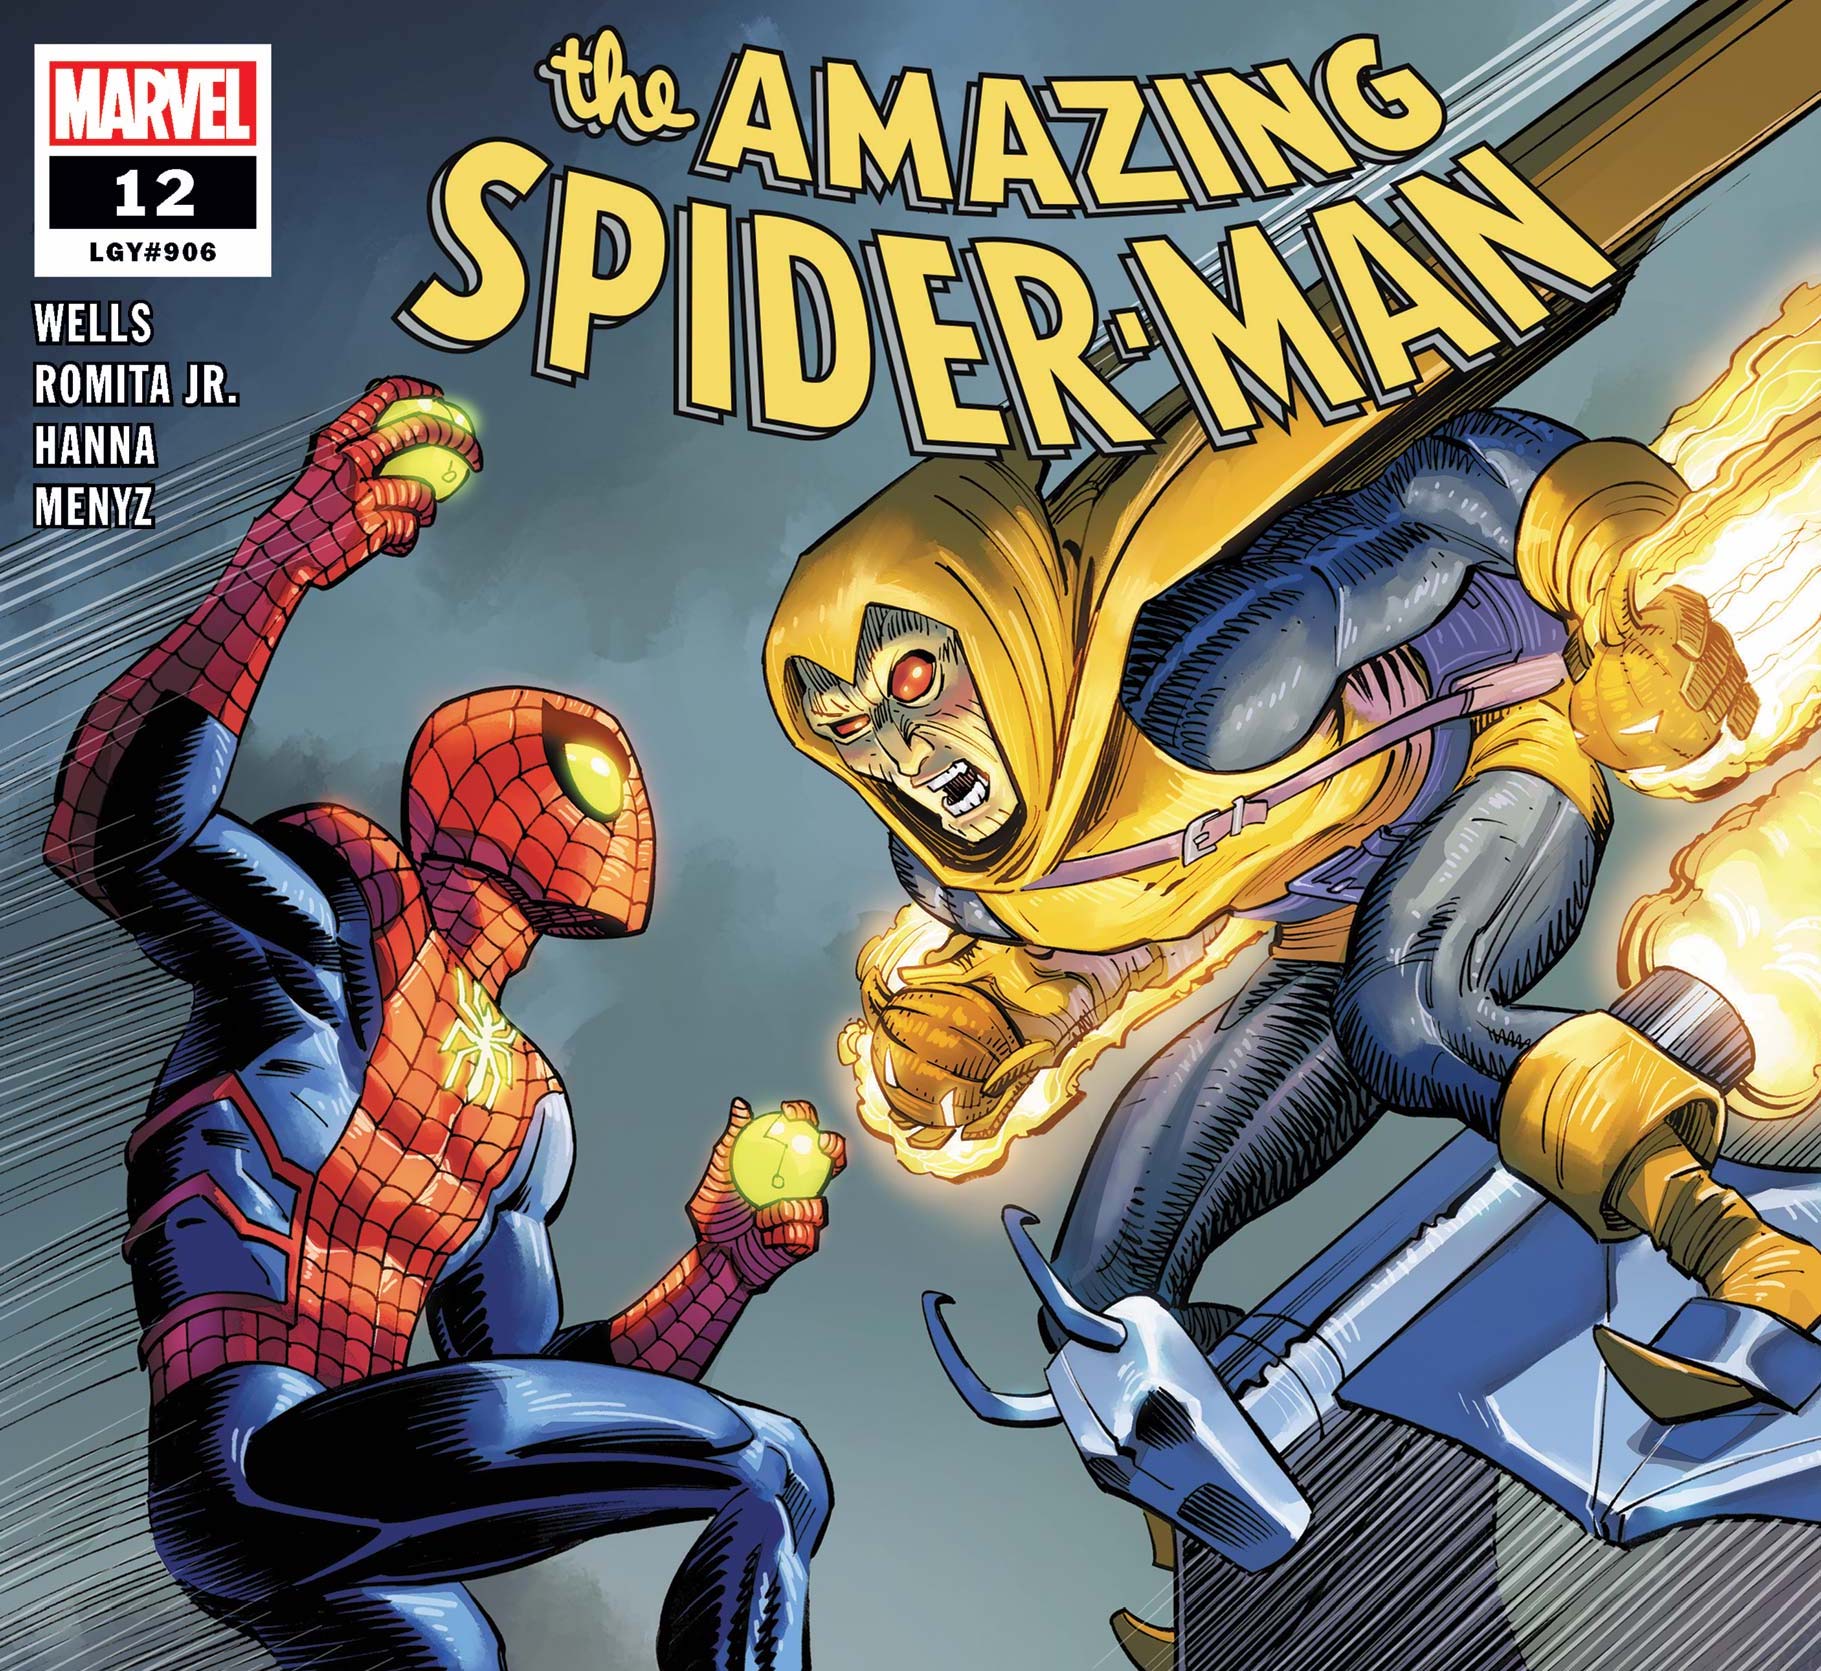 Amazing Spider-Man #12 review